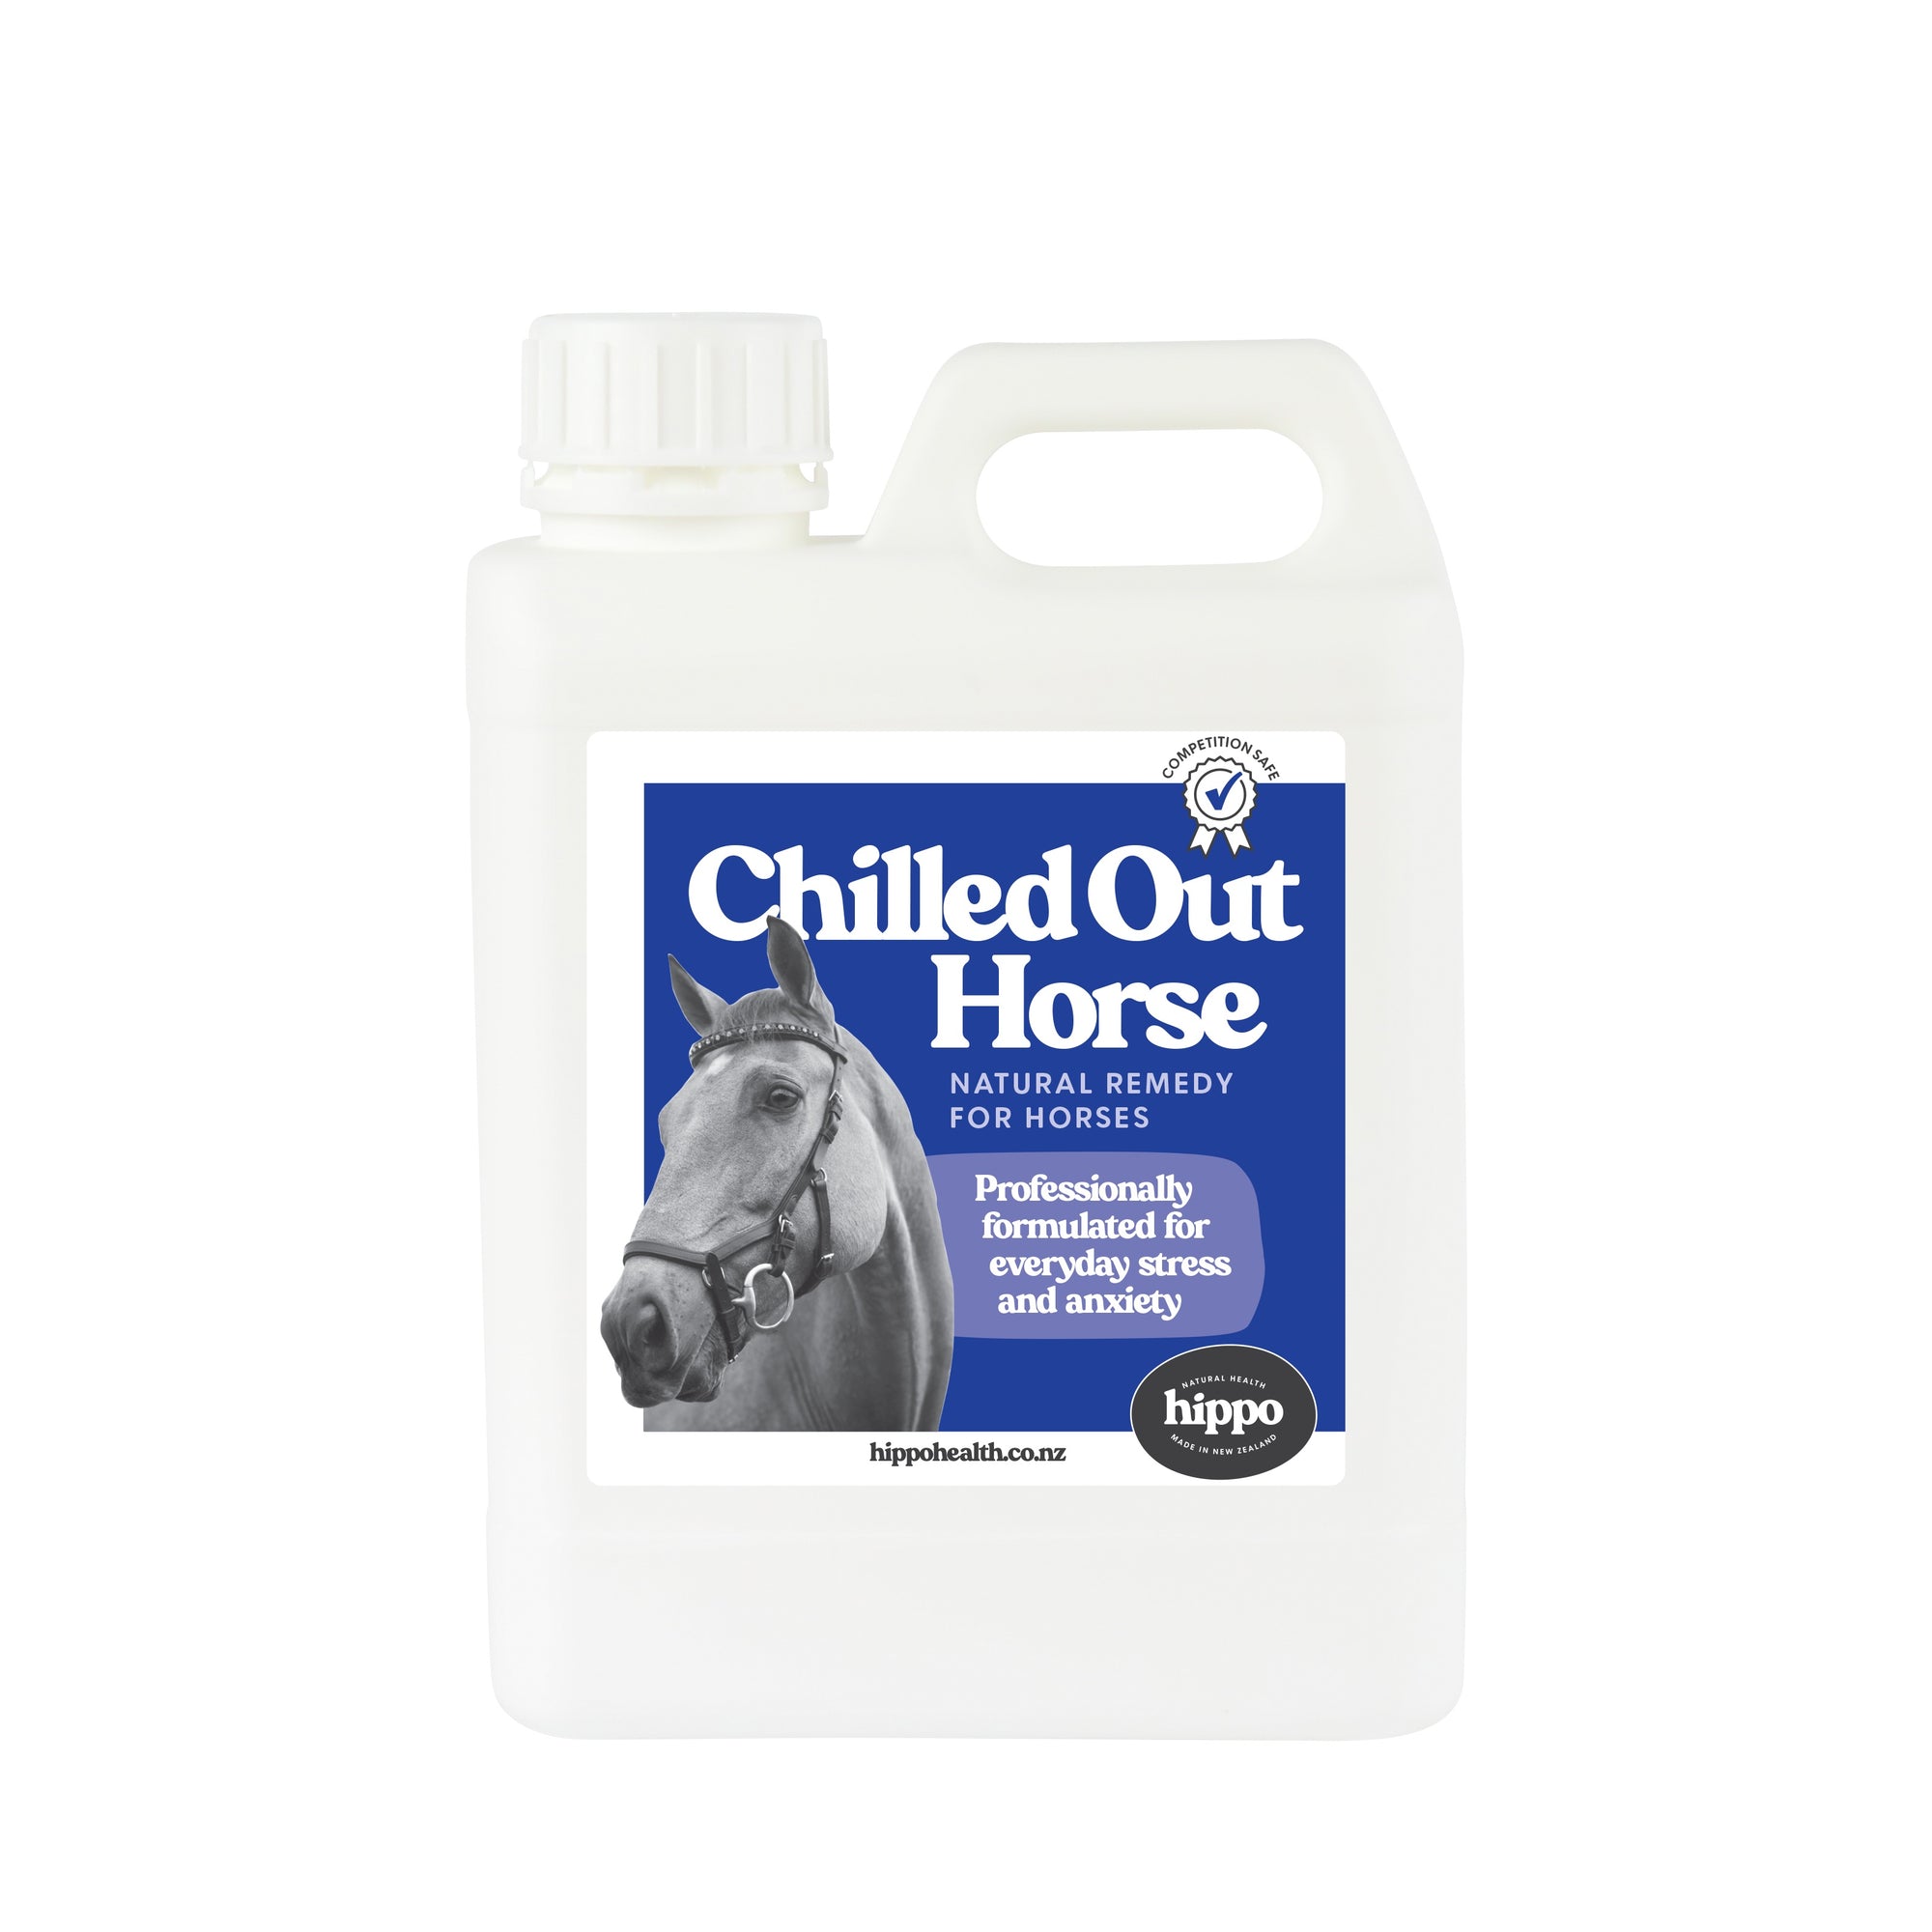 Chilled Out Horse - remedy for horses